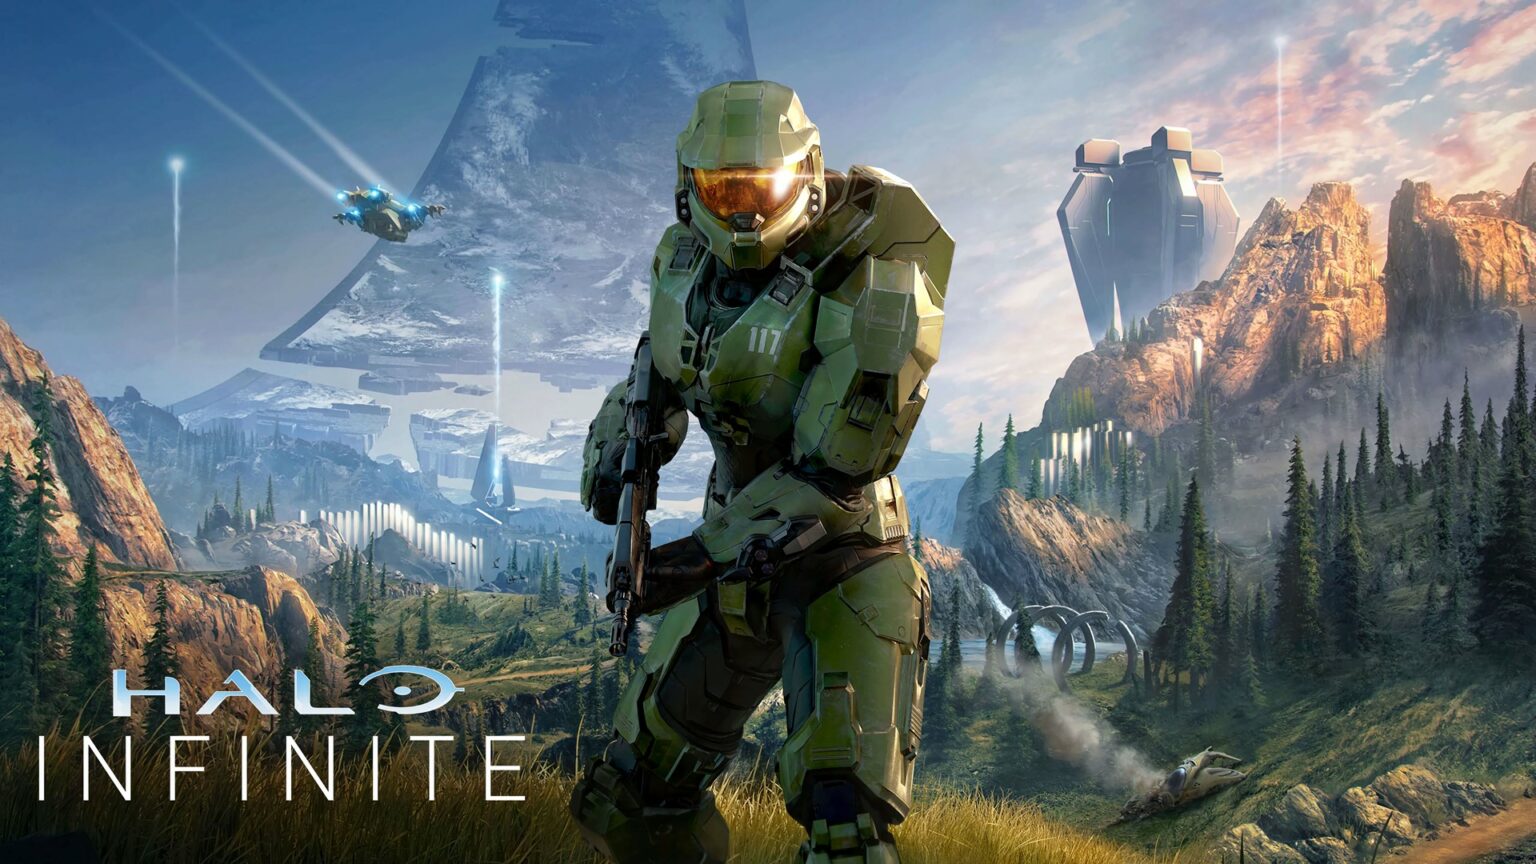 Job Listing from 343 Industries Points to an All-new Halo Adventure cover